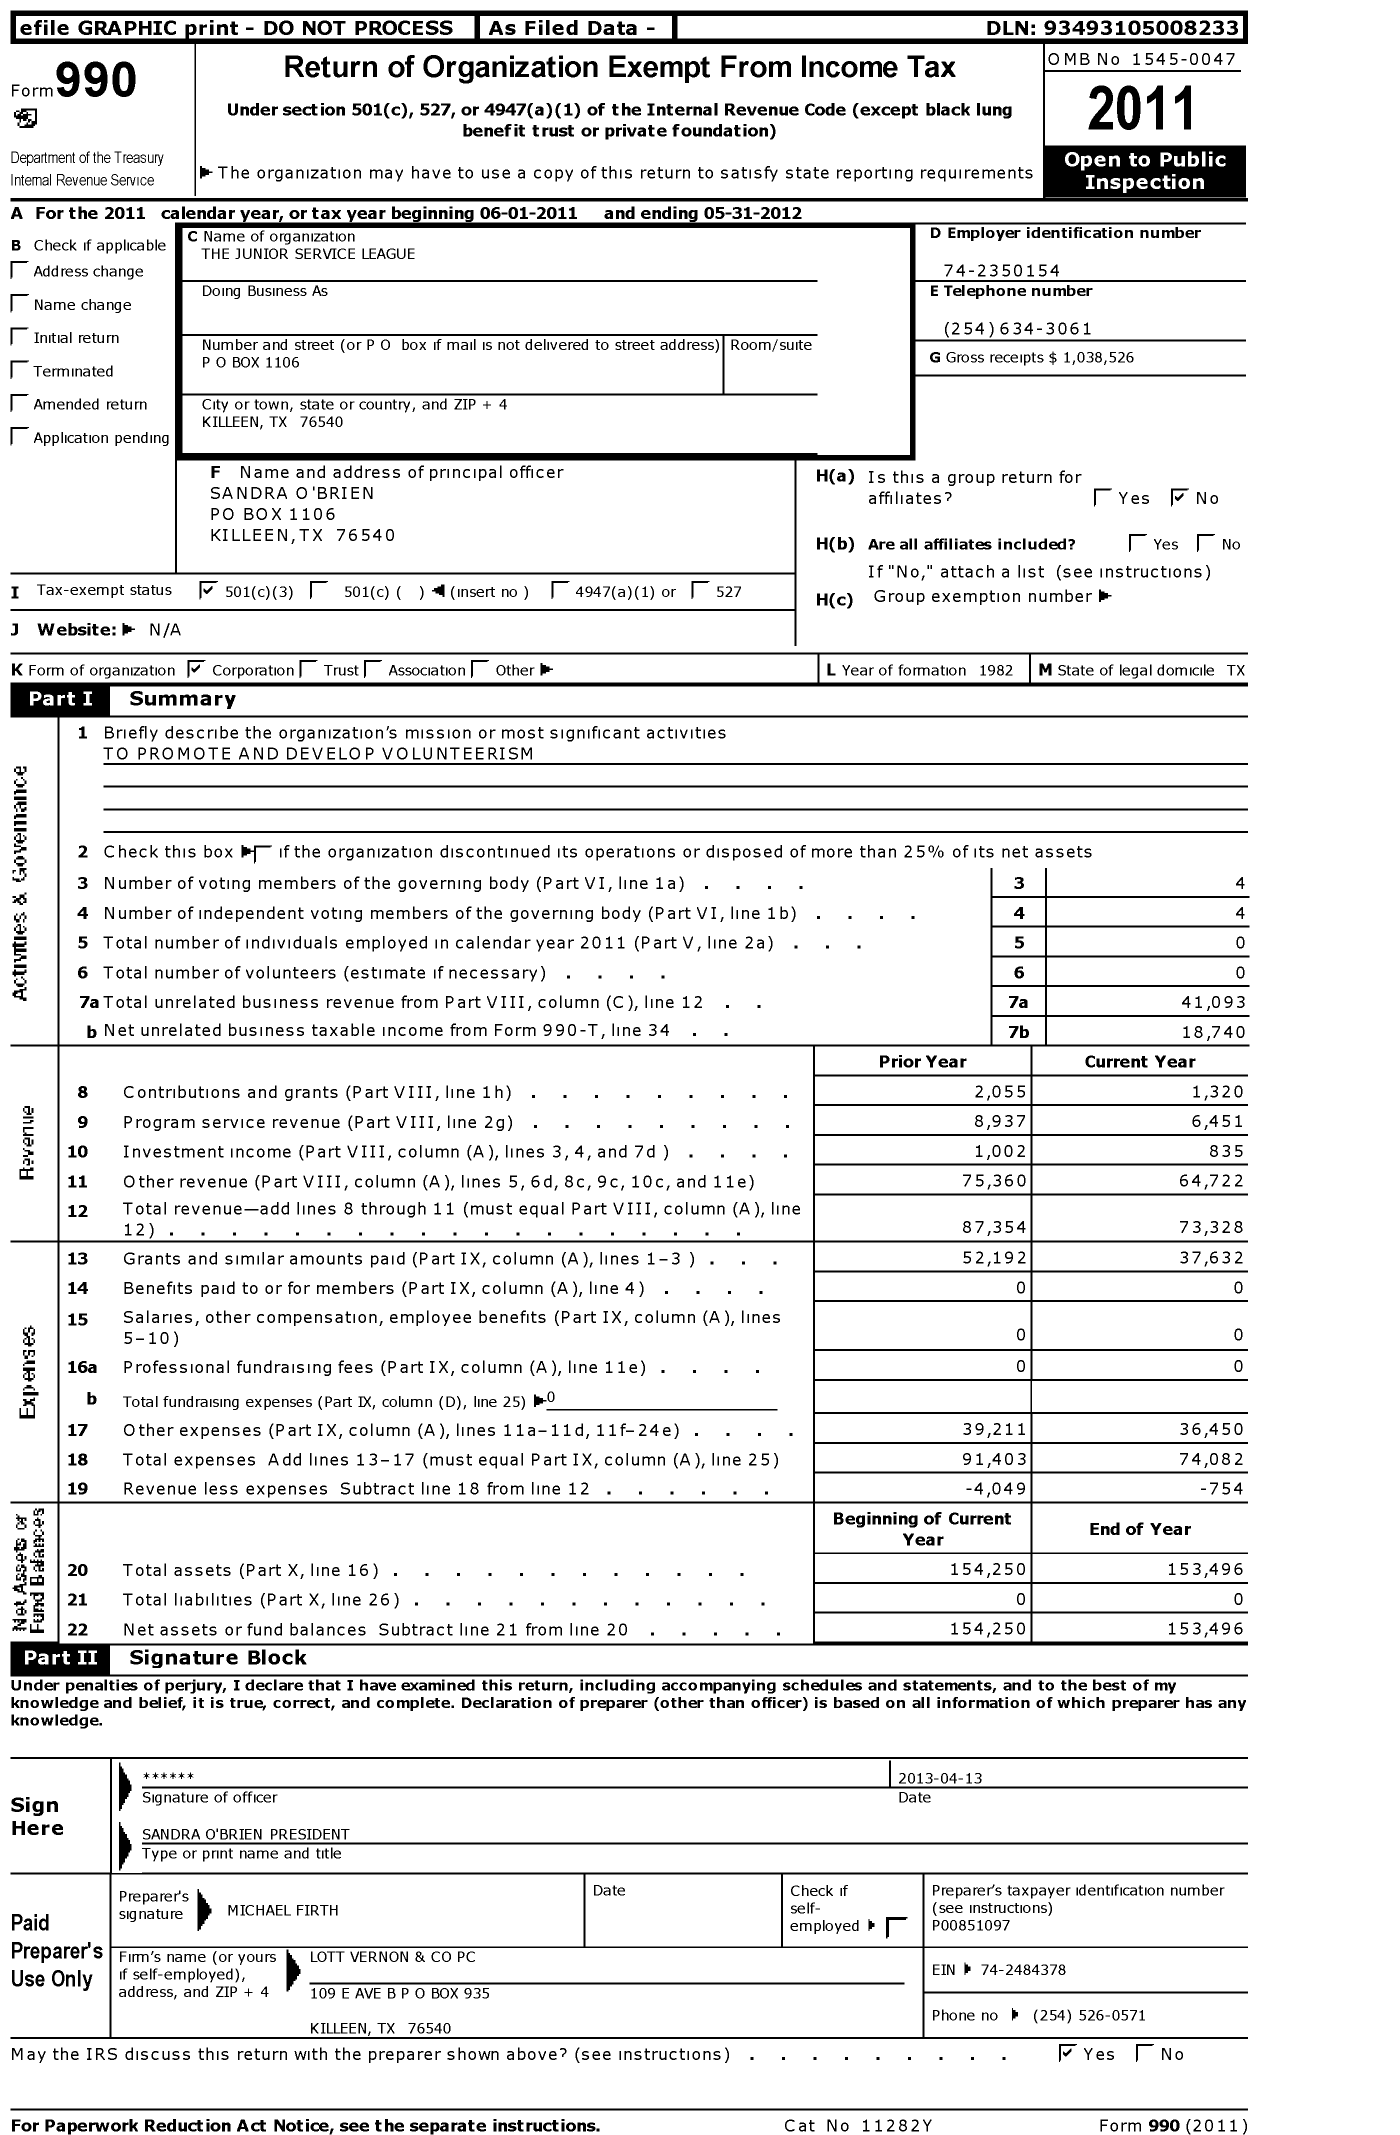 Image of first page of 2011 Form 990 for The Junior Service League